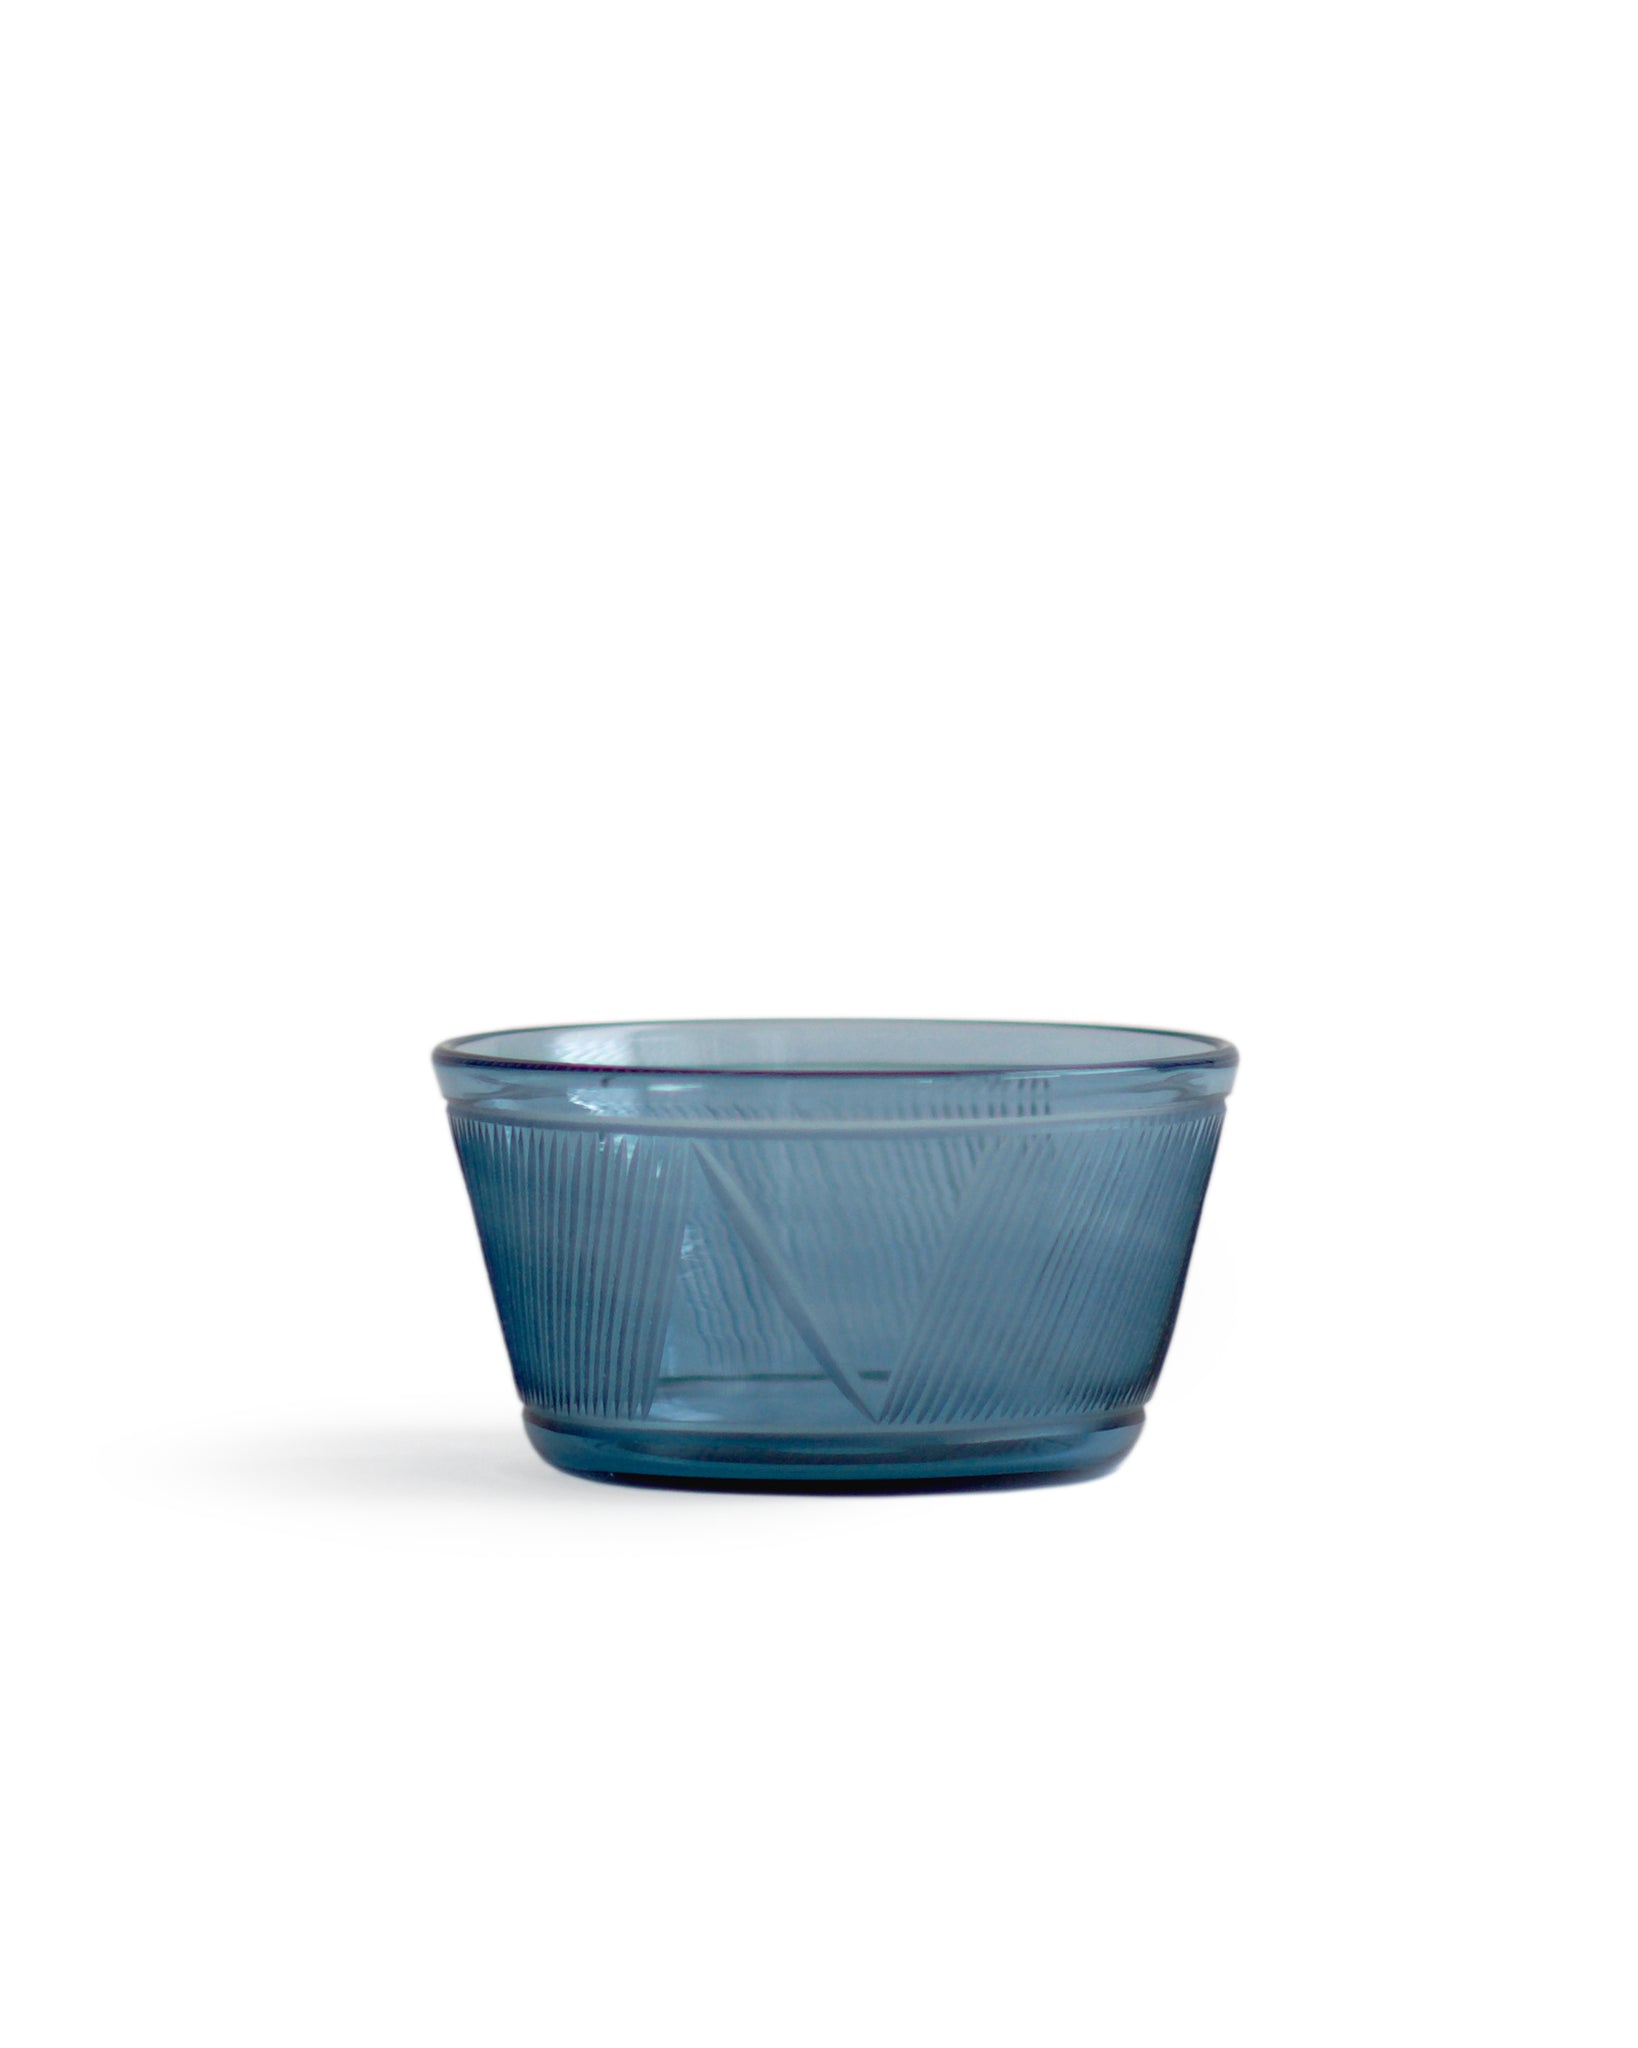 Silhouetted large reclaimed blue bowl in dark blue against white background.